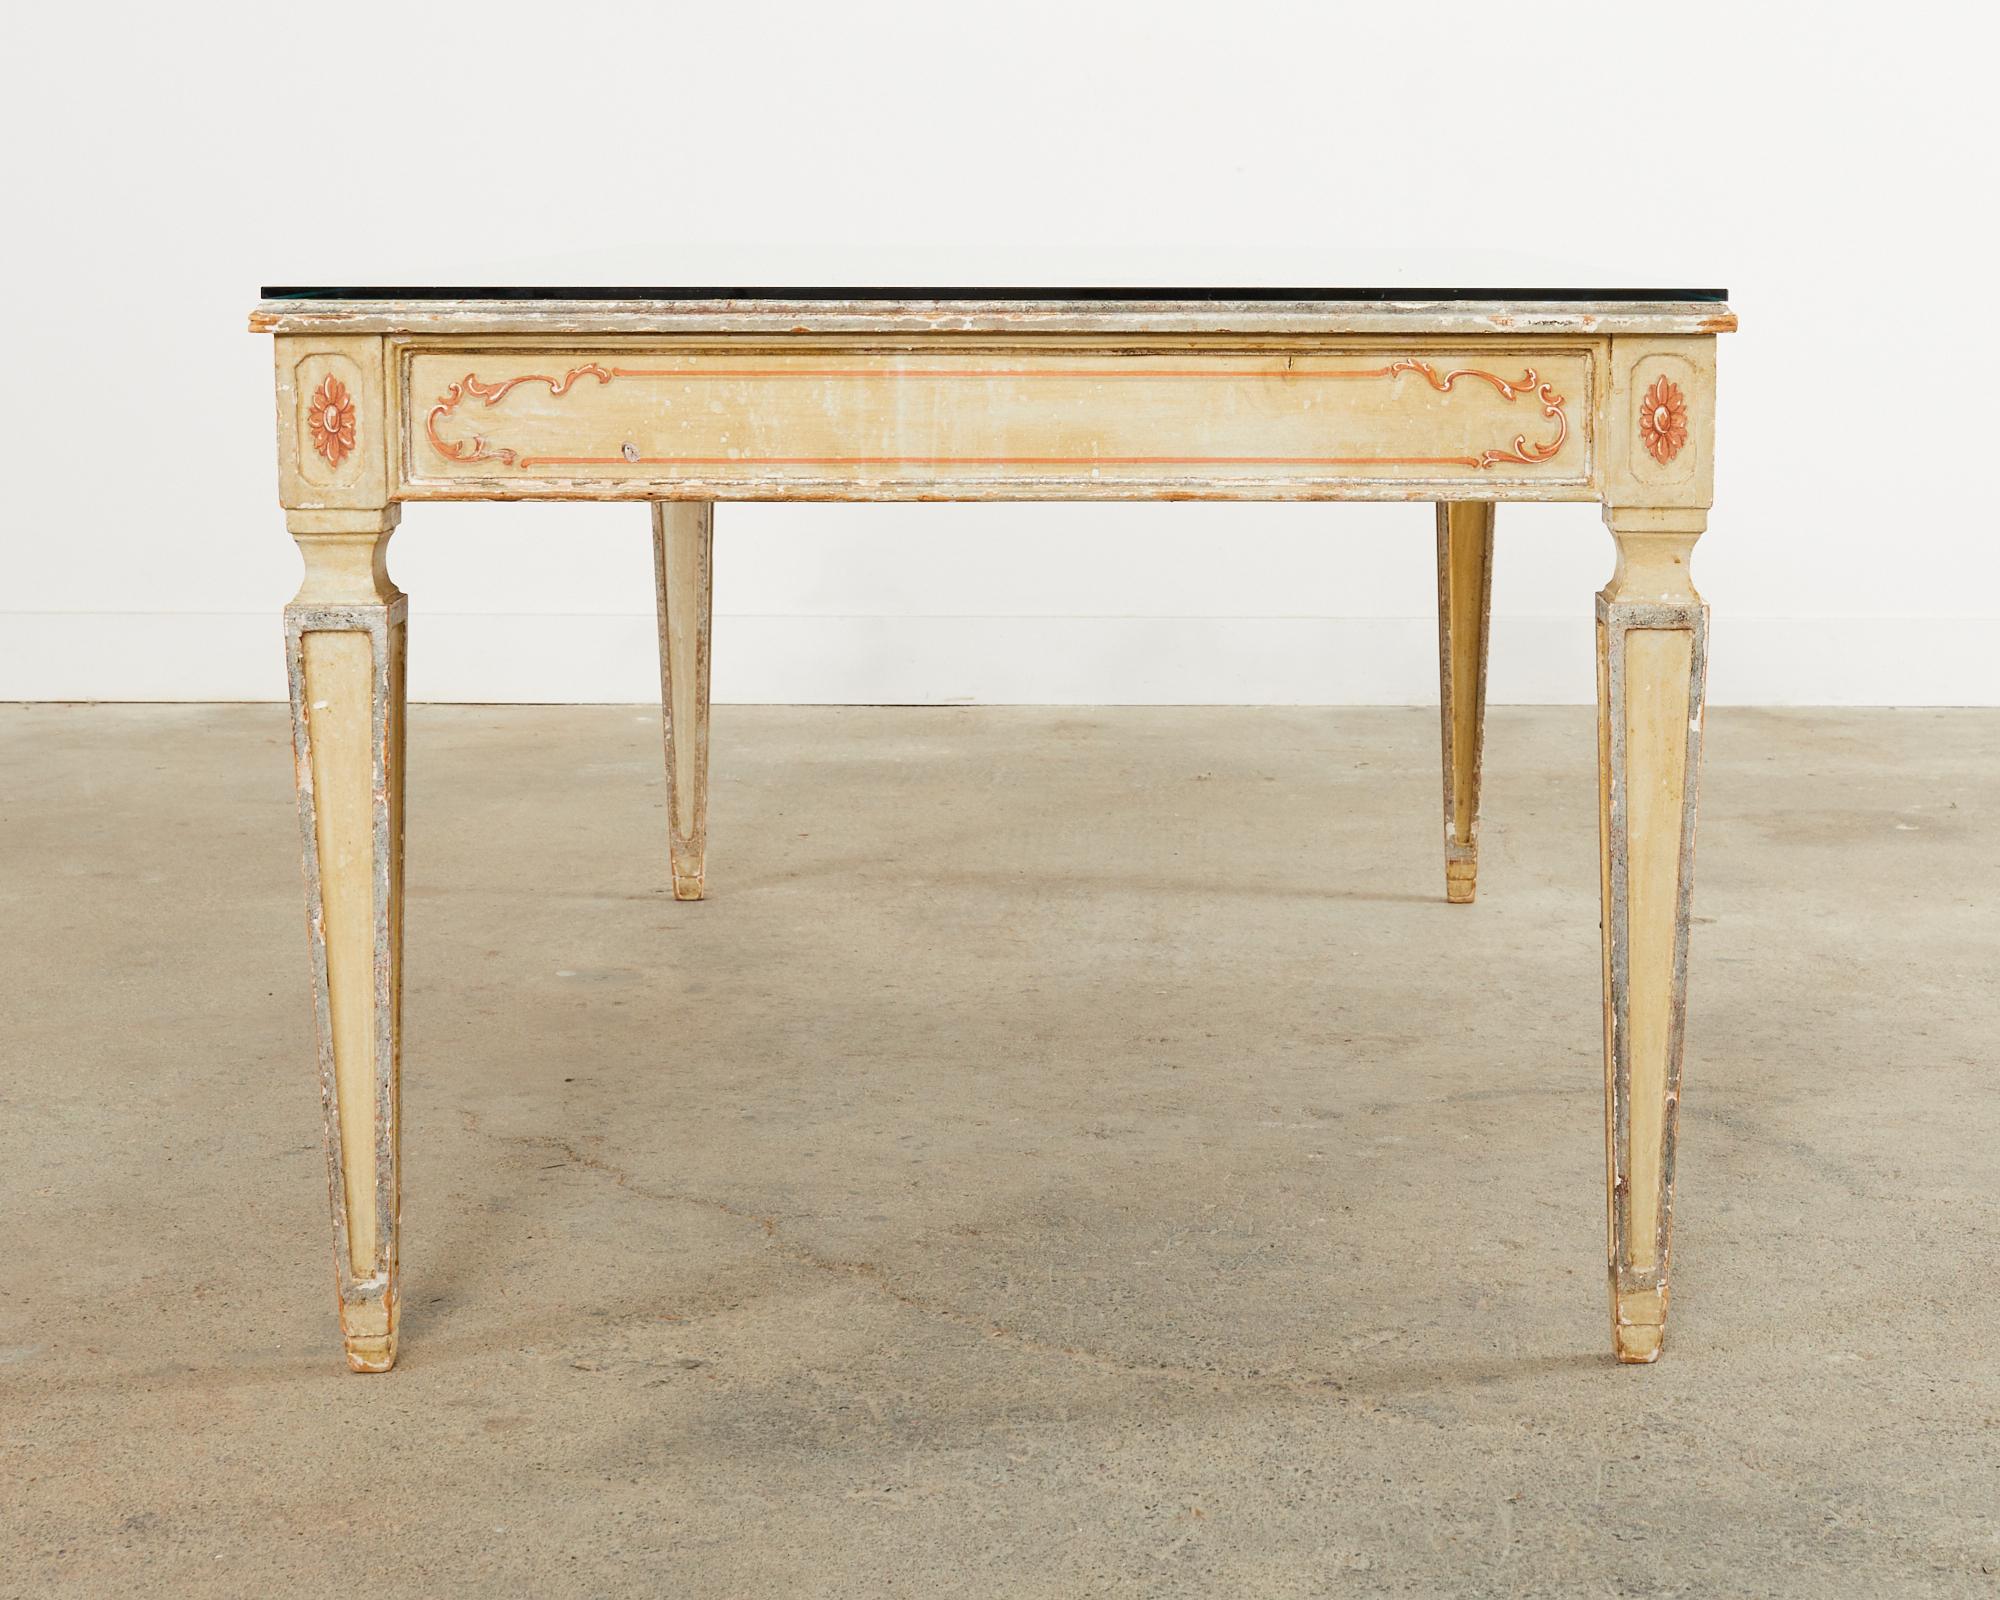 19th Century Italian Neoclassical Style Venetian Painted Dining Table For Sale 2